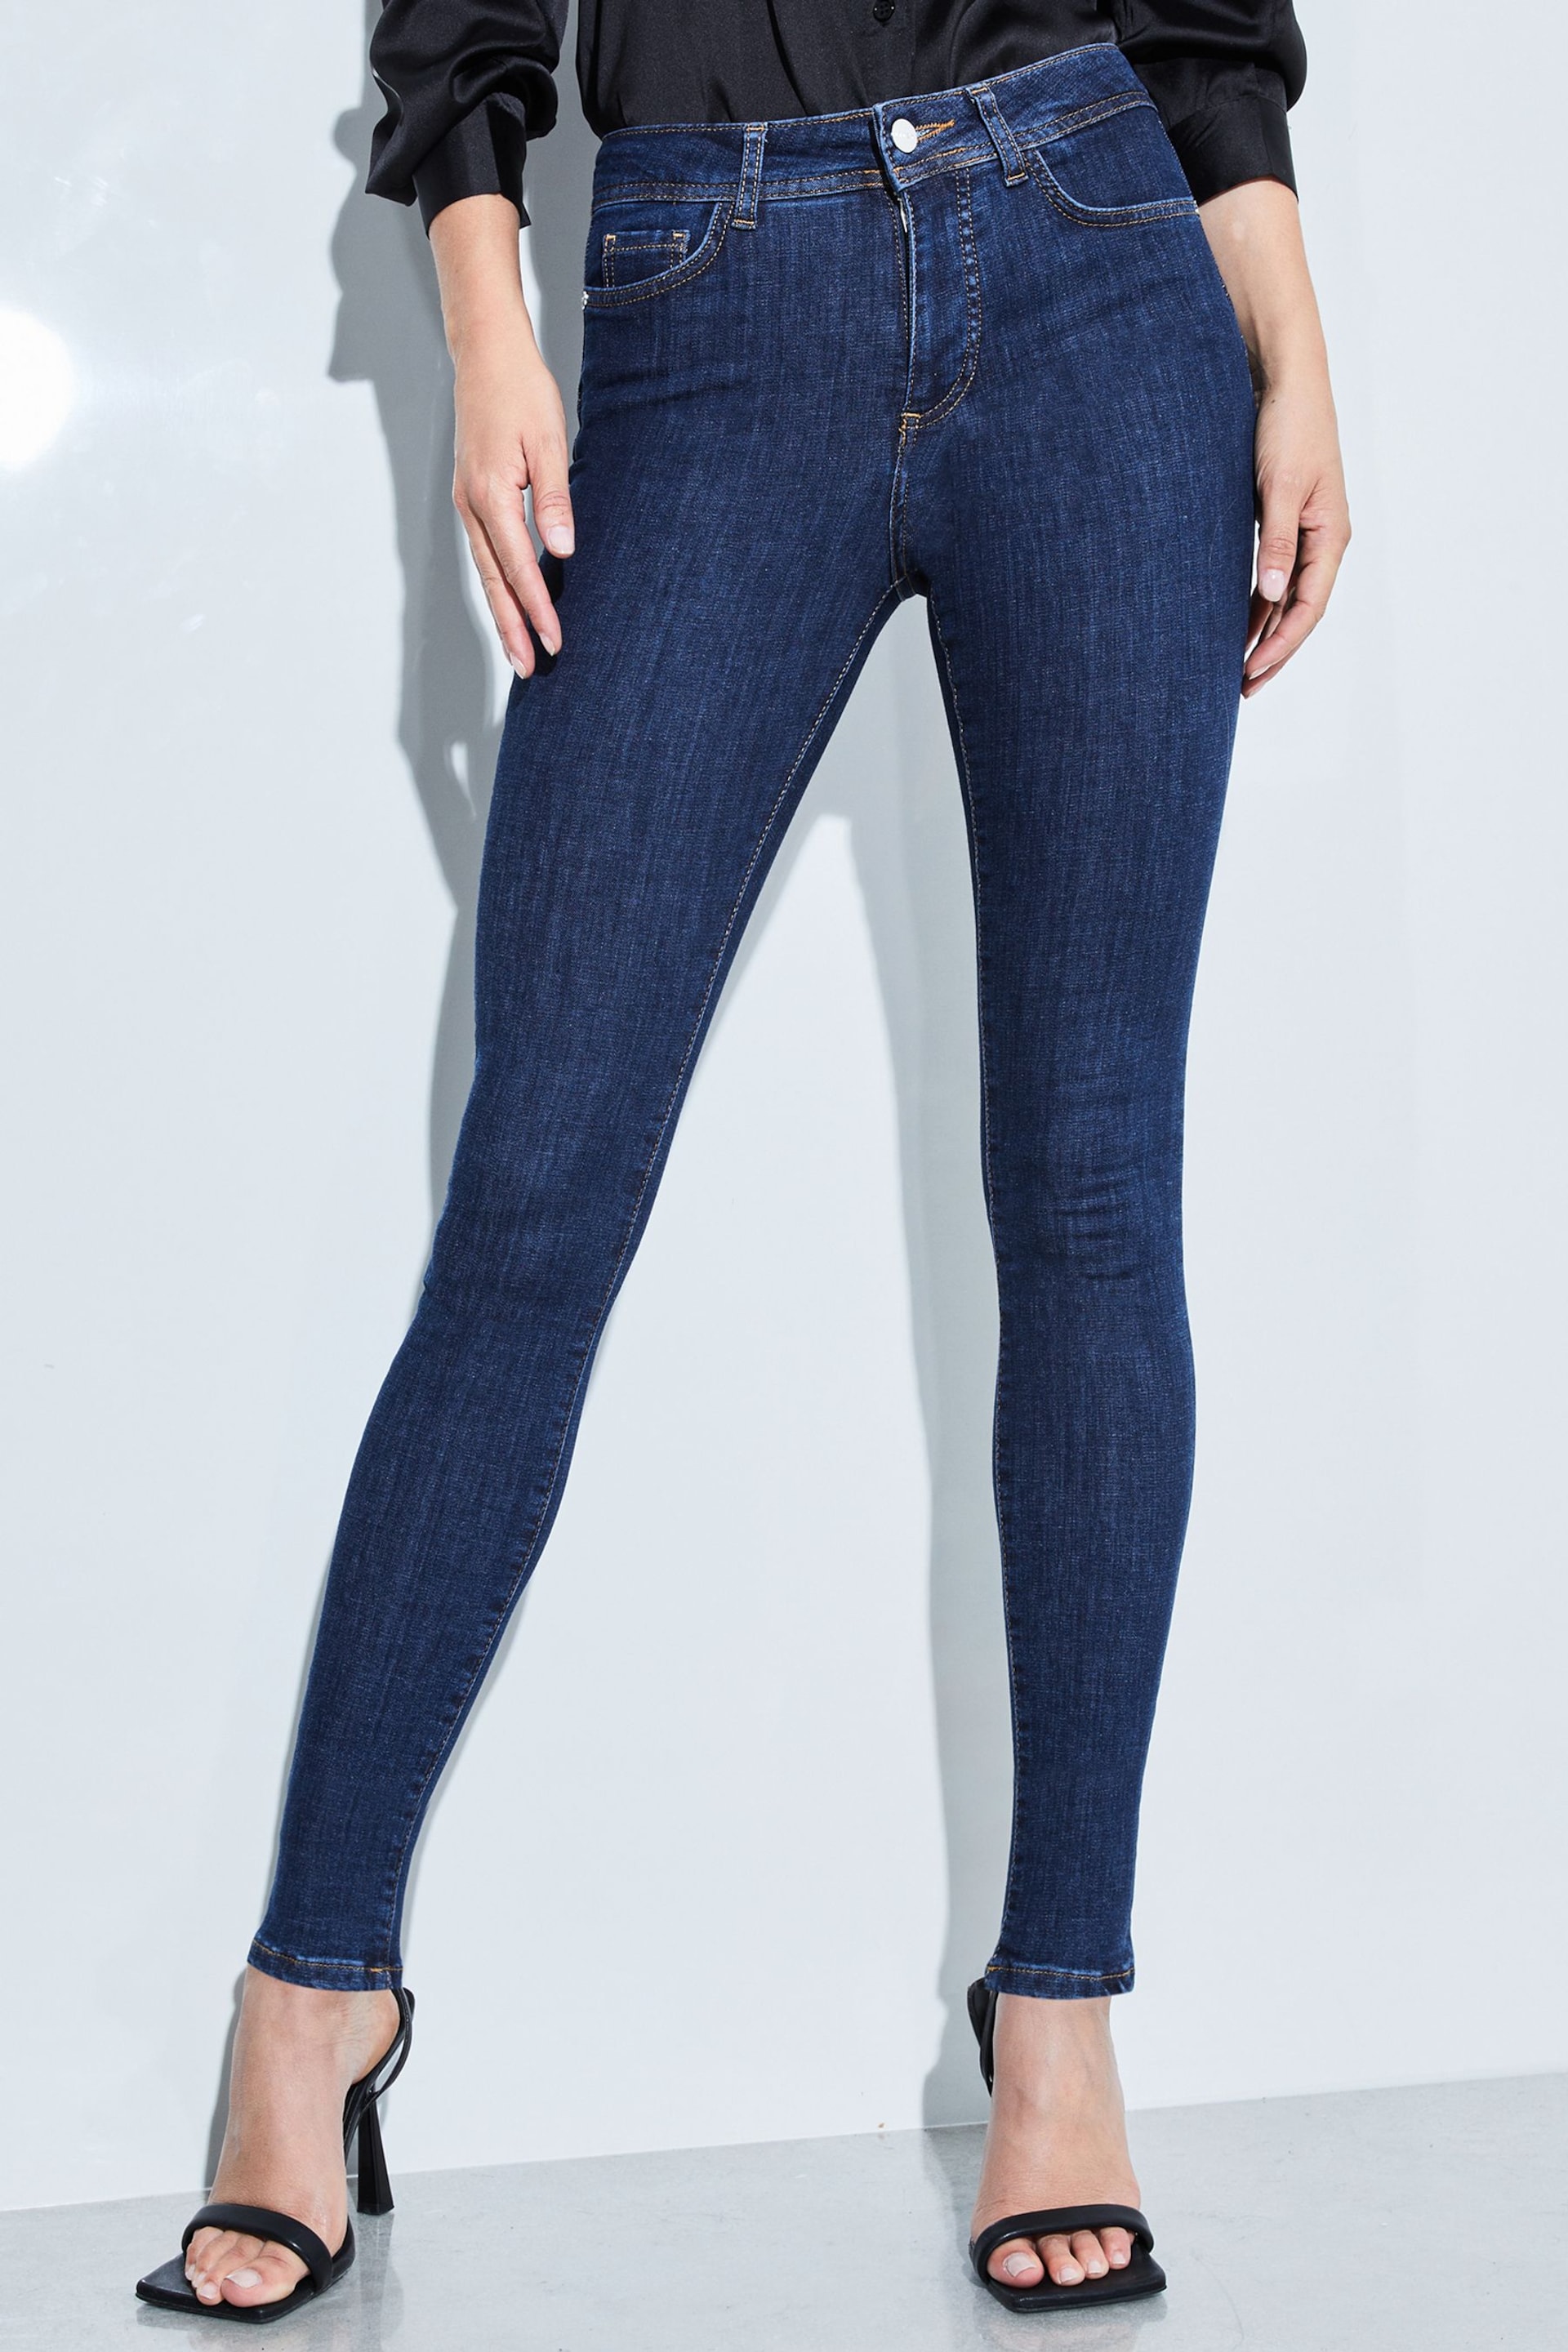 Lipsy Midwash Blue High Waist Sculpt, Slim and Shape Skinny Jeans - Image 2 of 4